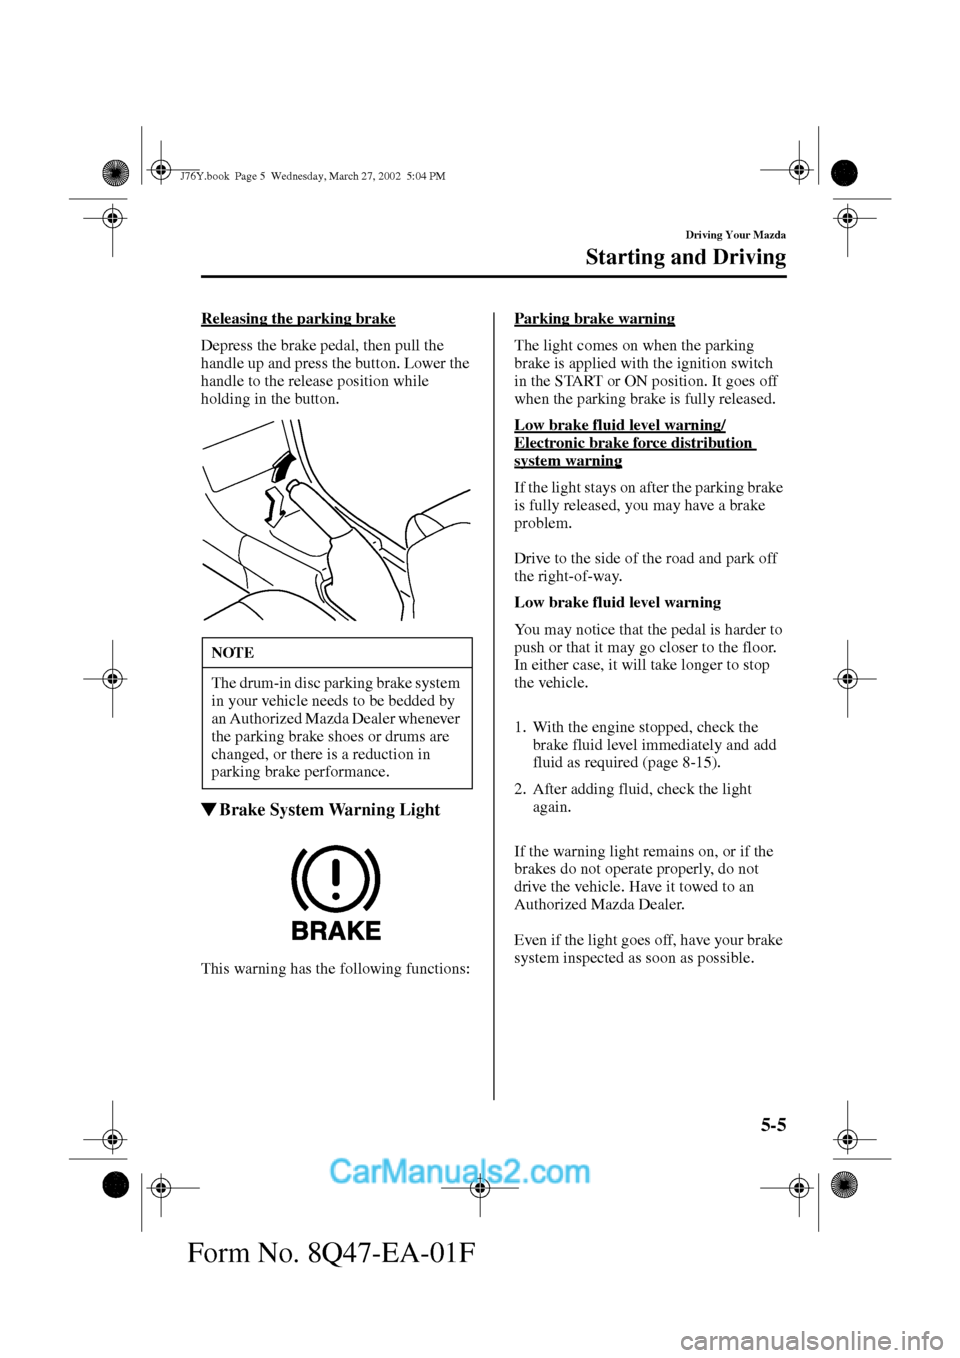 MAZDA MODEL MILLENIA 2002  Owners Manual (in English) 5-5
Driving Your Mazda
Starting and Driving
Form No. 8Q47-EA-01F
Releasing the parking brake
Depress the brake pedal, then pull the 
handle up and press the button. Lower the 
handle to the release po